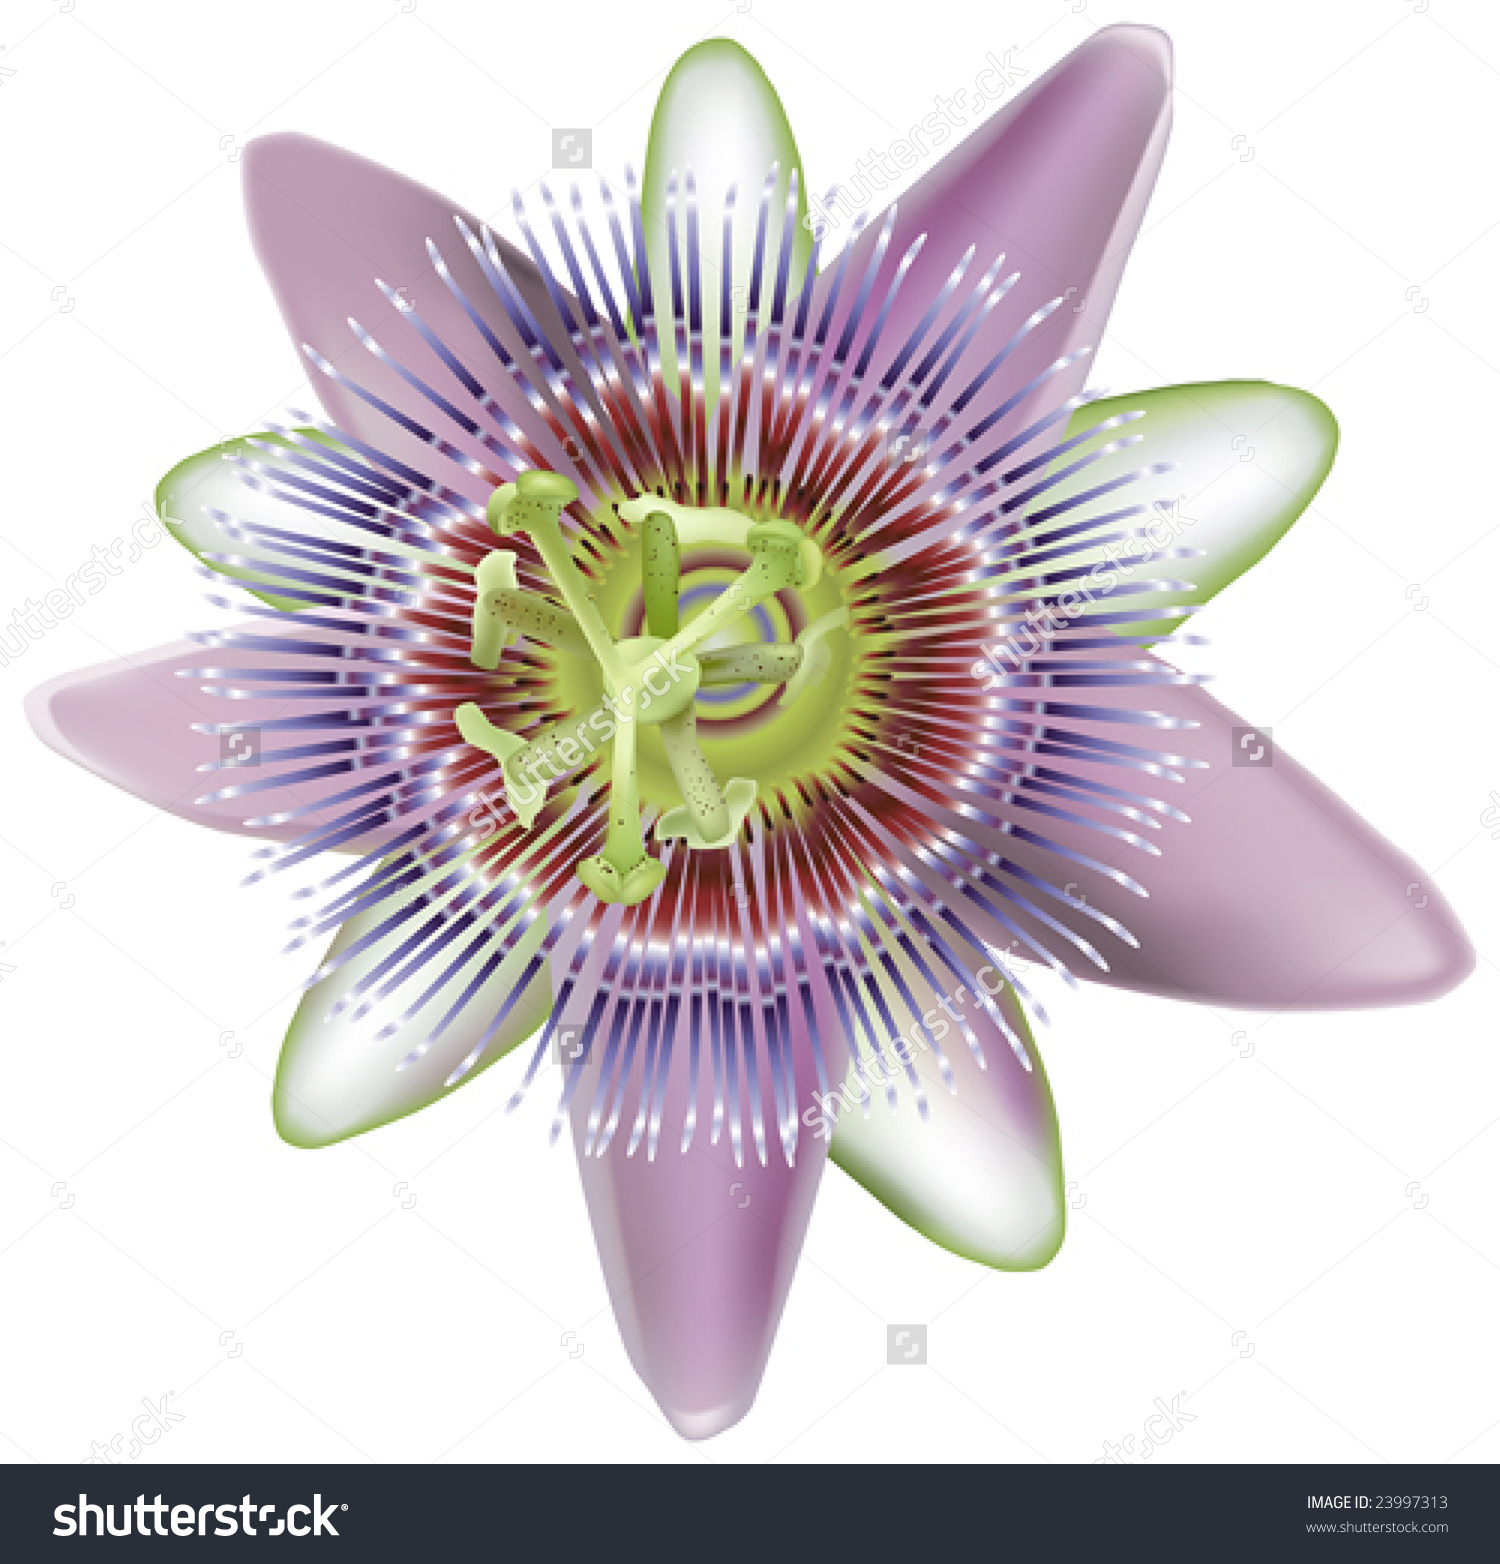 Passion Flower clipart #5, Download drawings